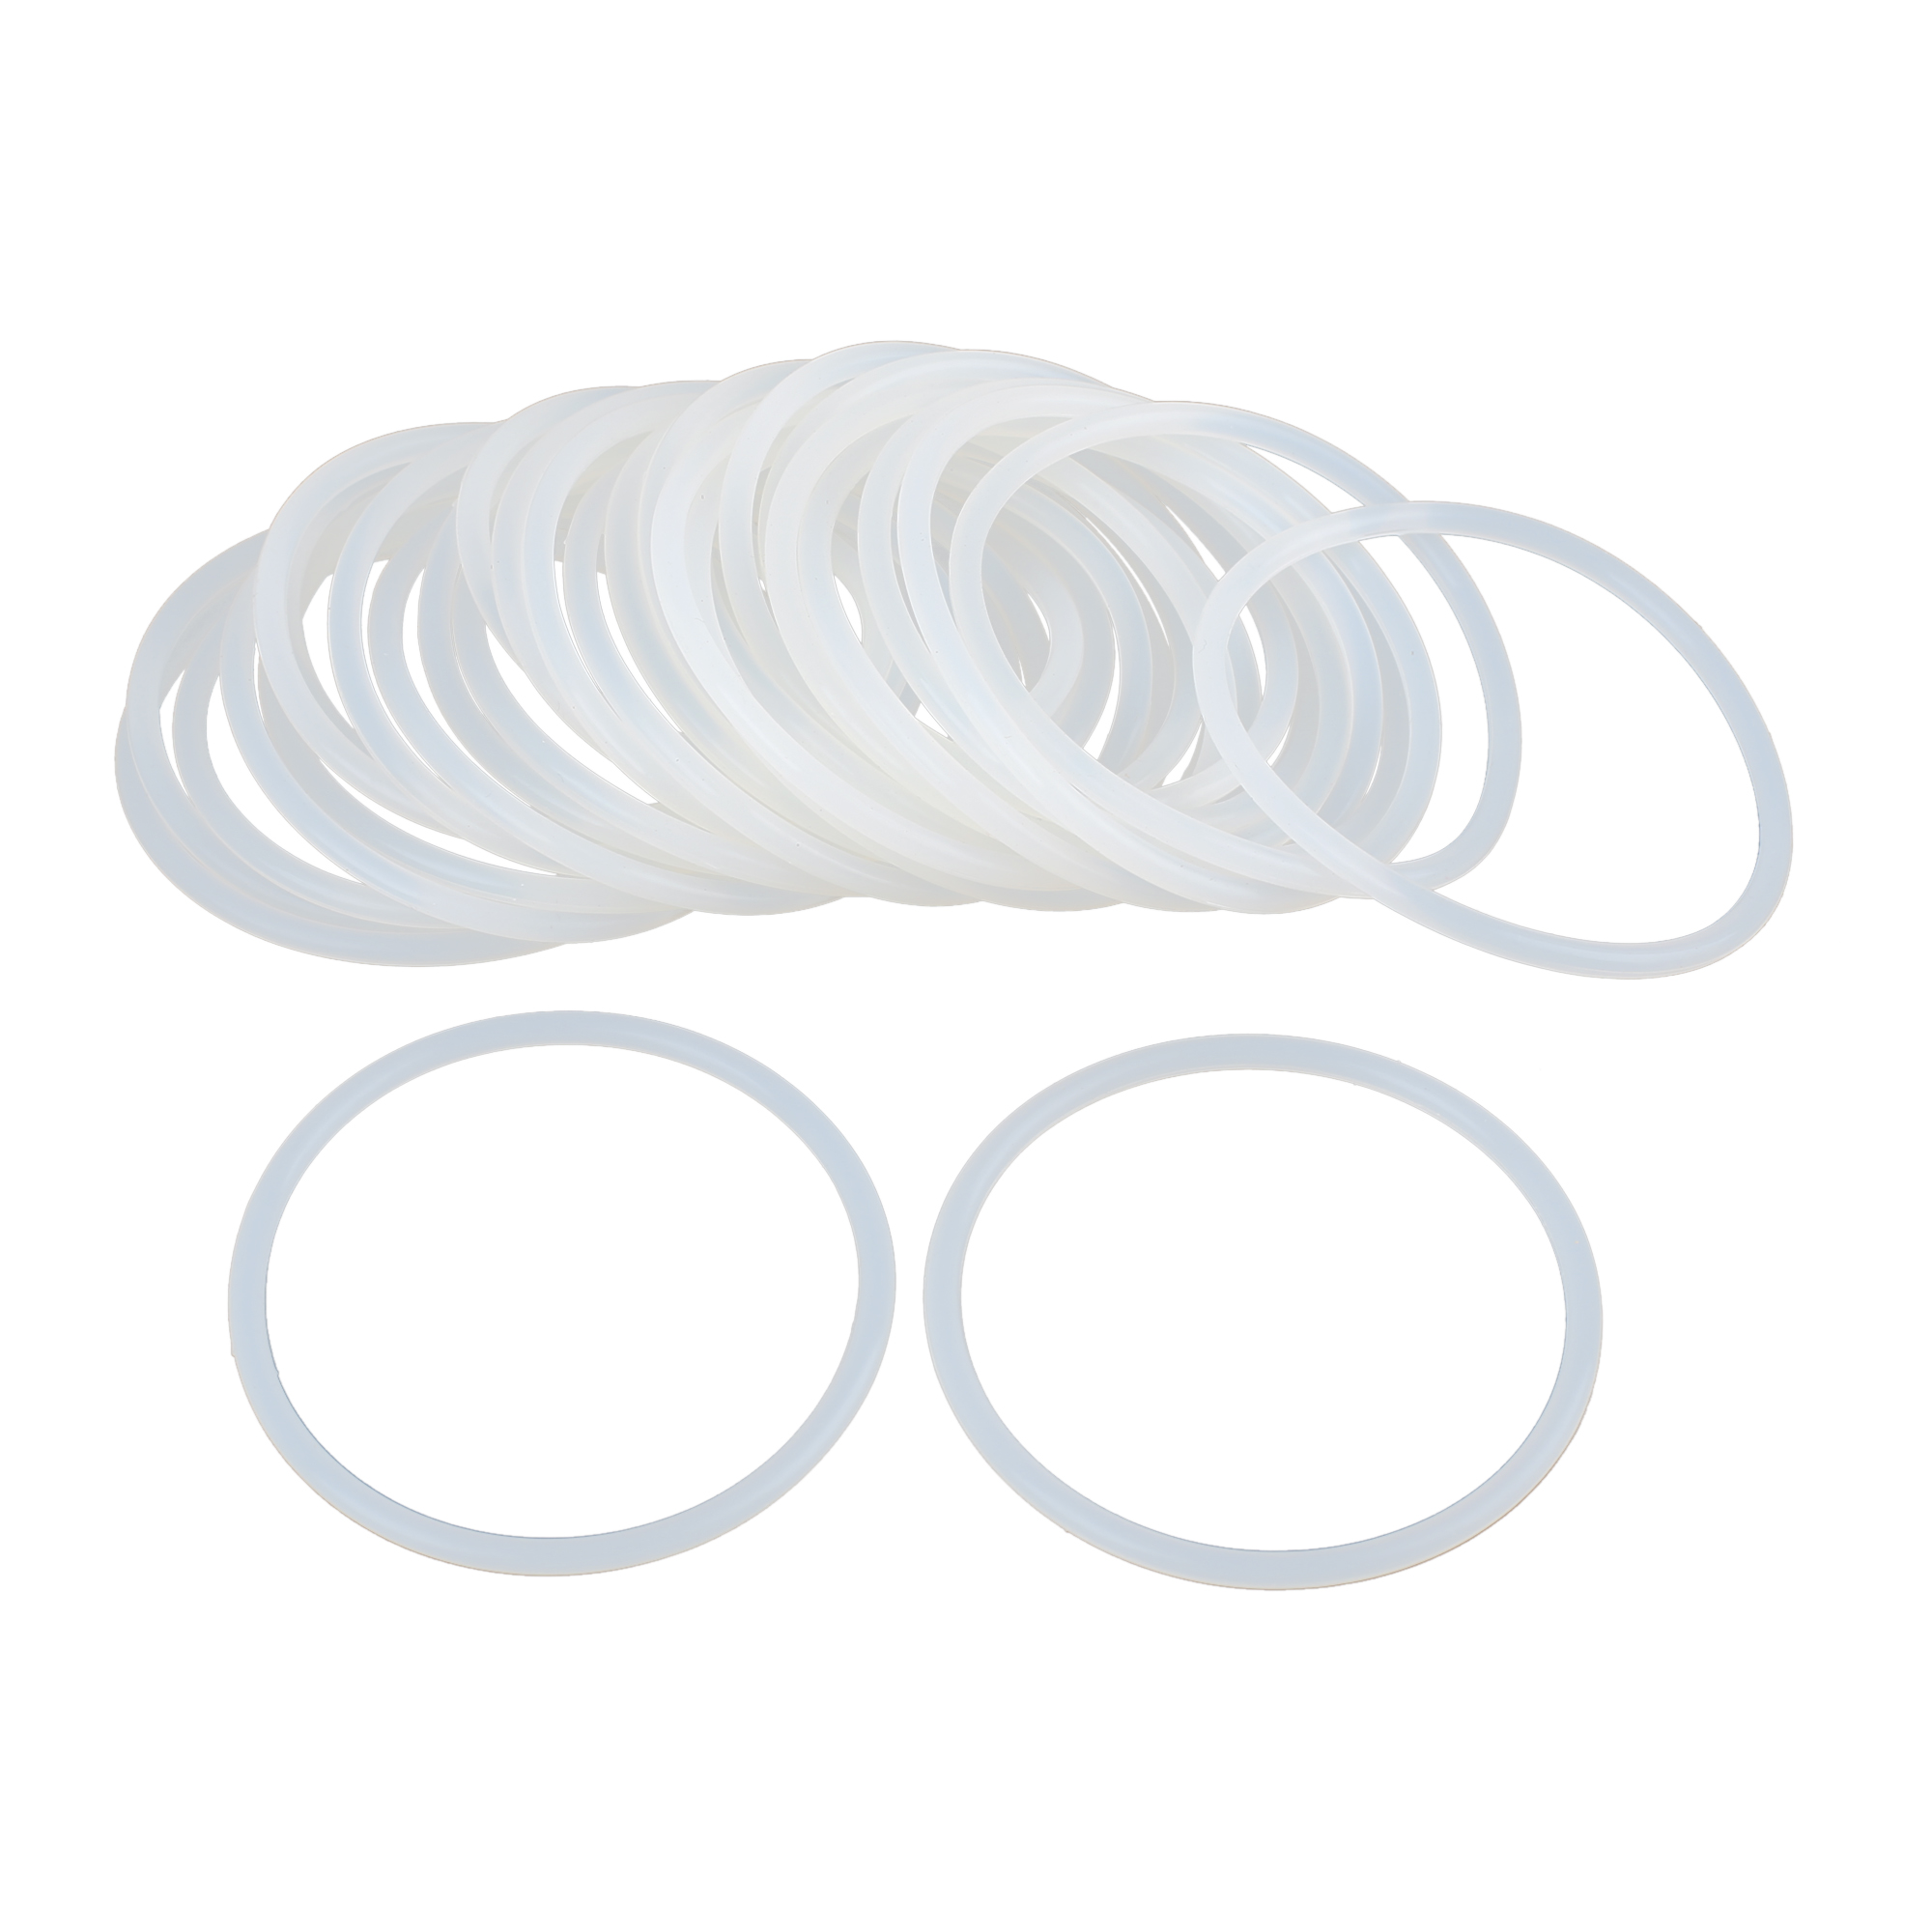 16mm Inner Diameter Seal Gasket White 30Pcs uxcell Silicone O-Rings 19mm OD 1.5mm Width